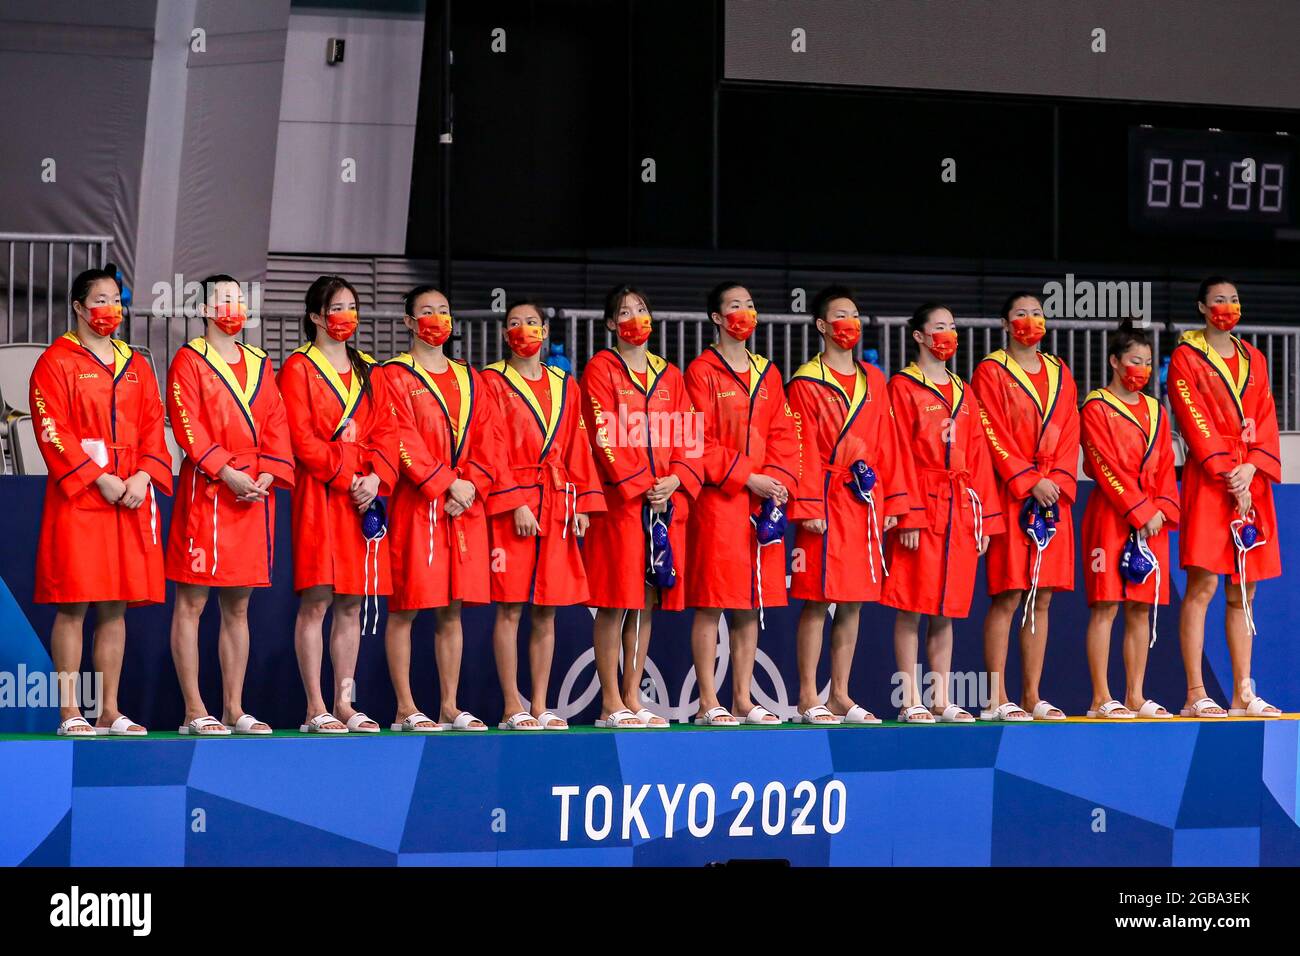 TOKYO, JAPAN - AUGUST 3: Xiaohan Mei of China, Xinyan Wang of China, Dunhan Xiong of China, Guannan Niu of China, Ying Zhai of China, Yiwen Lu of China, Huan Wang of China, Zewen Deng of China, Danyi Zhang of China, Xiao Chen of China, Jing Zhang of China, Yineng Shen of China during the Tokyo 2020 Olympic Waterpolo Tournament women's quarterfinal match between Spain and China at Tatsumi Waterpolo Centre on August 3, 2021 in Tokyo, Japan (Photo by Marcel ter Bals/Orange Pictures) Credit: Orange Pics BV/Alamy Live News Stock Photo